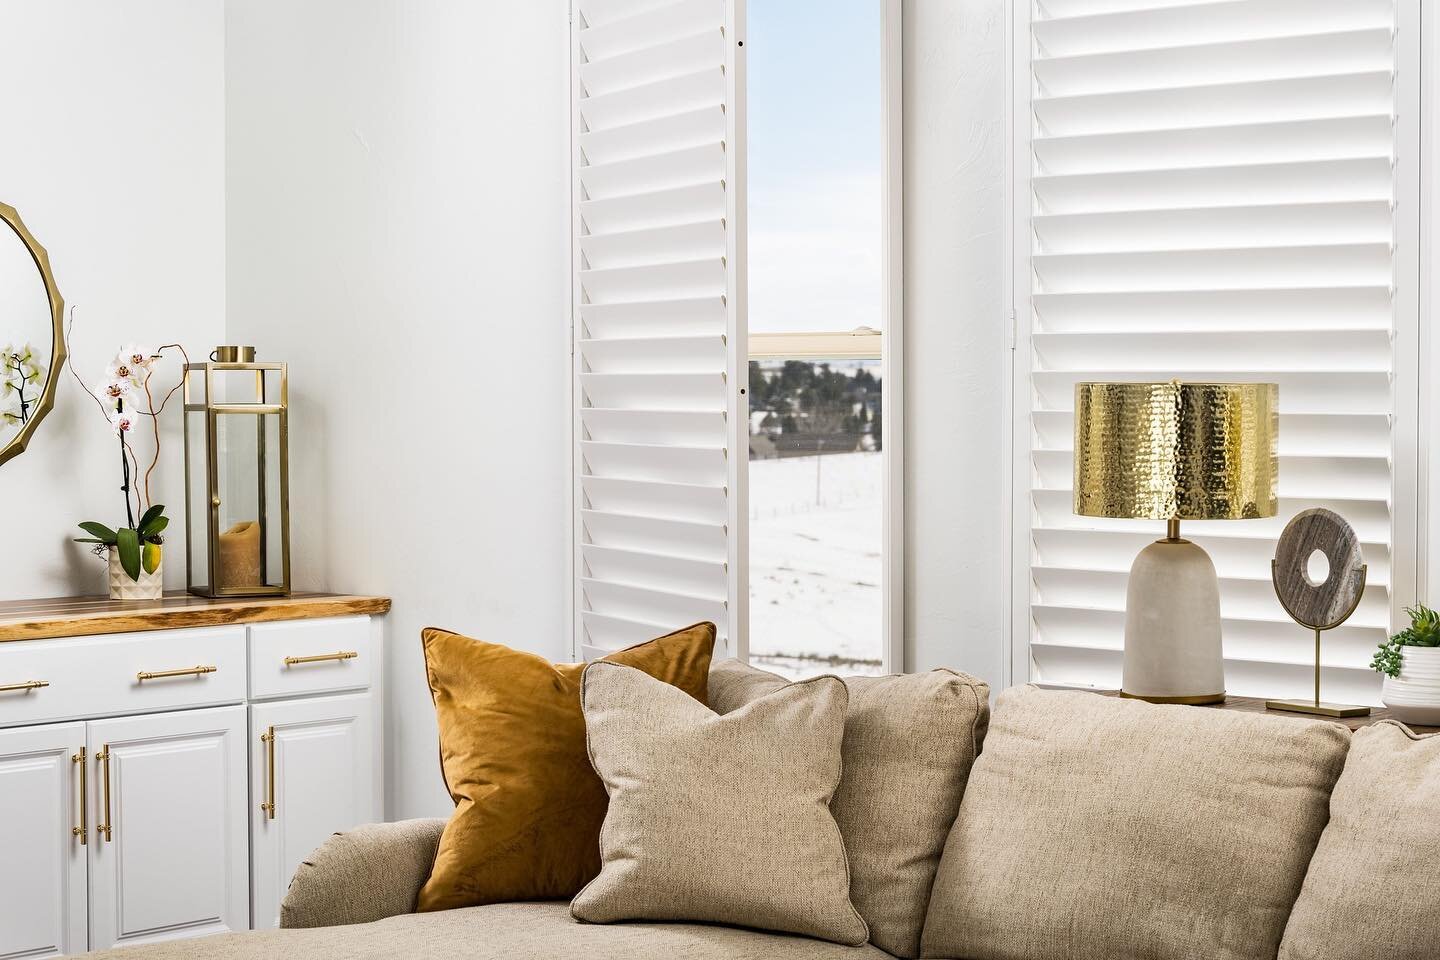 Step into a winter wonderland with our timeless white shutters that transform every view into a serene masterpiece. ❄️✨Ready to embrace the season? Dive into the winter vibes with 20% off all our custom interior shutters! Book your FREE consultation 